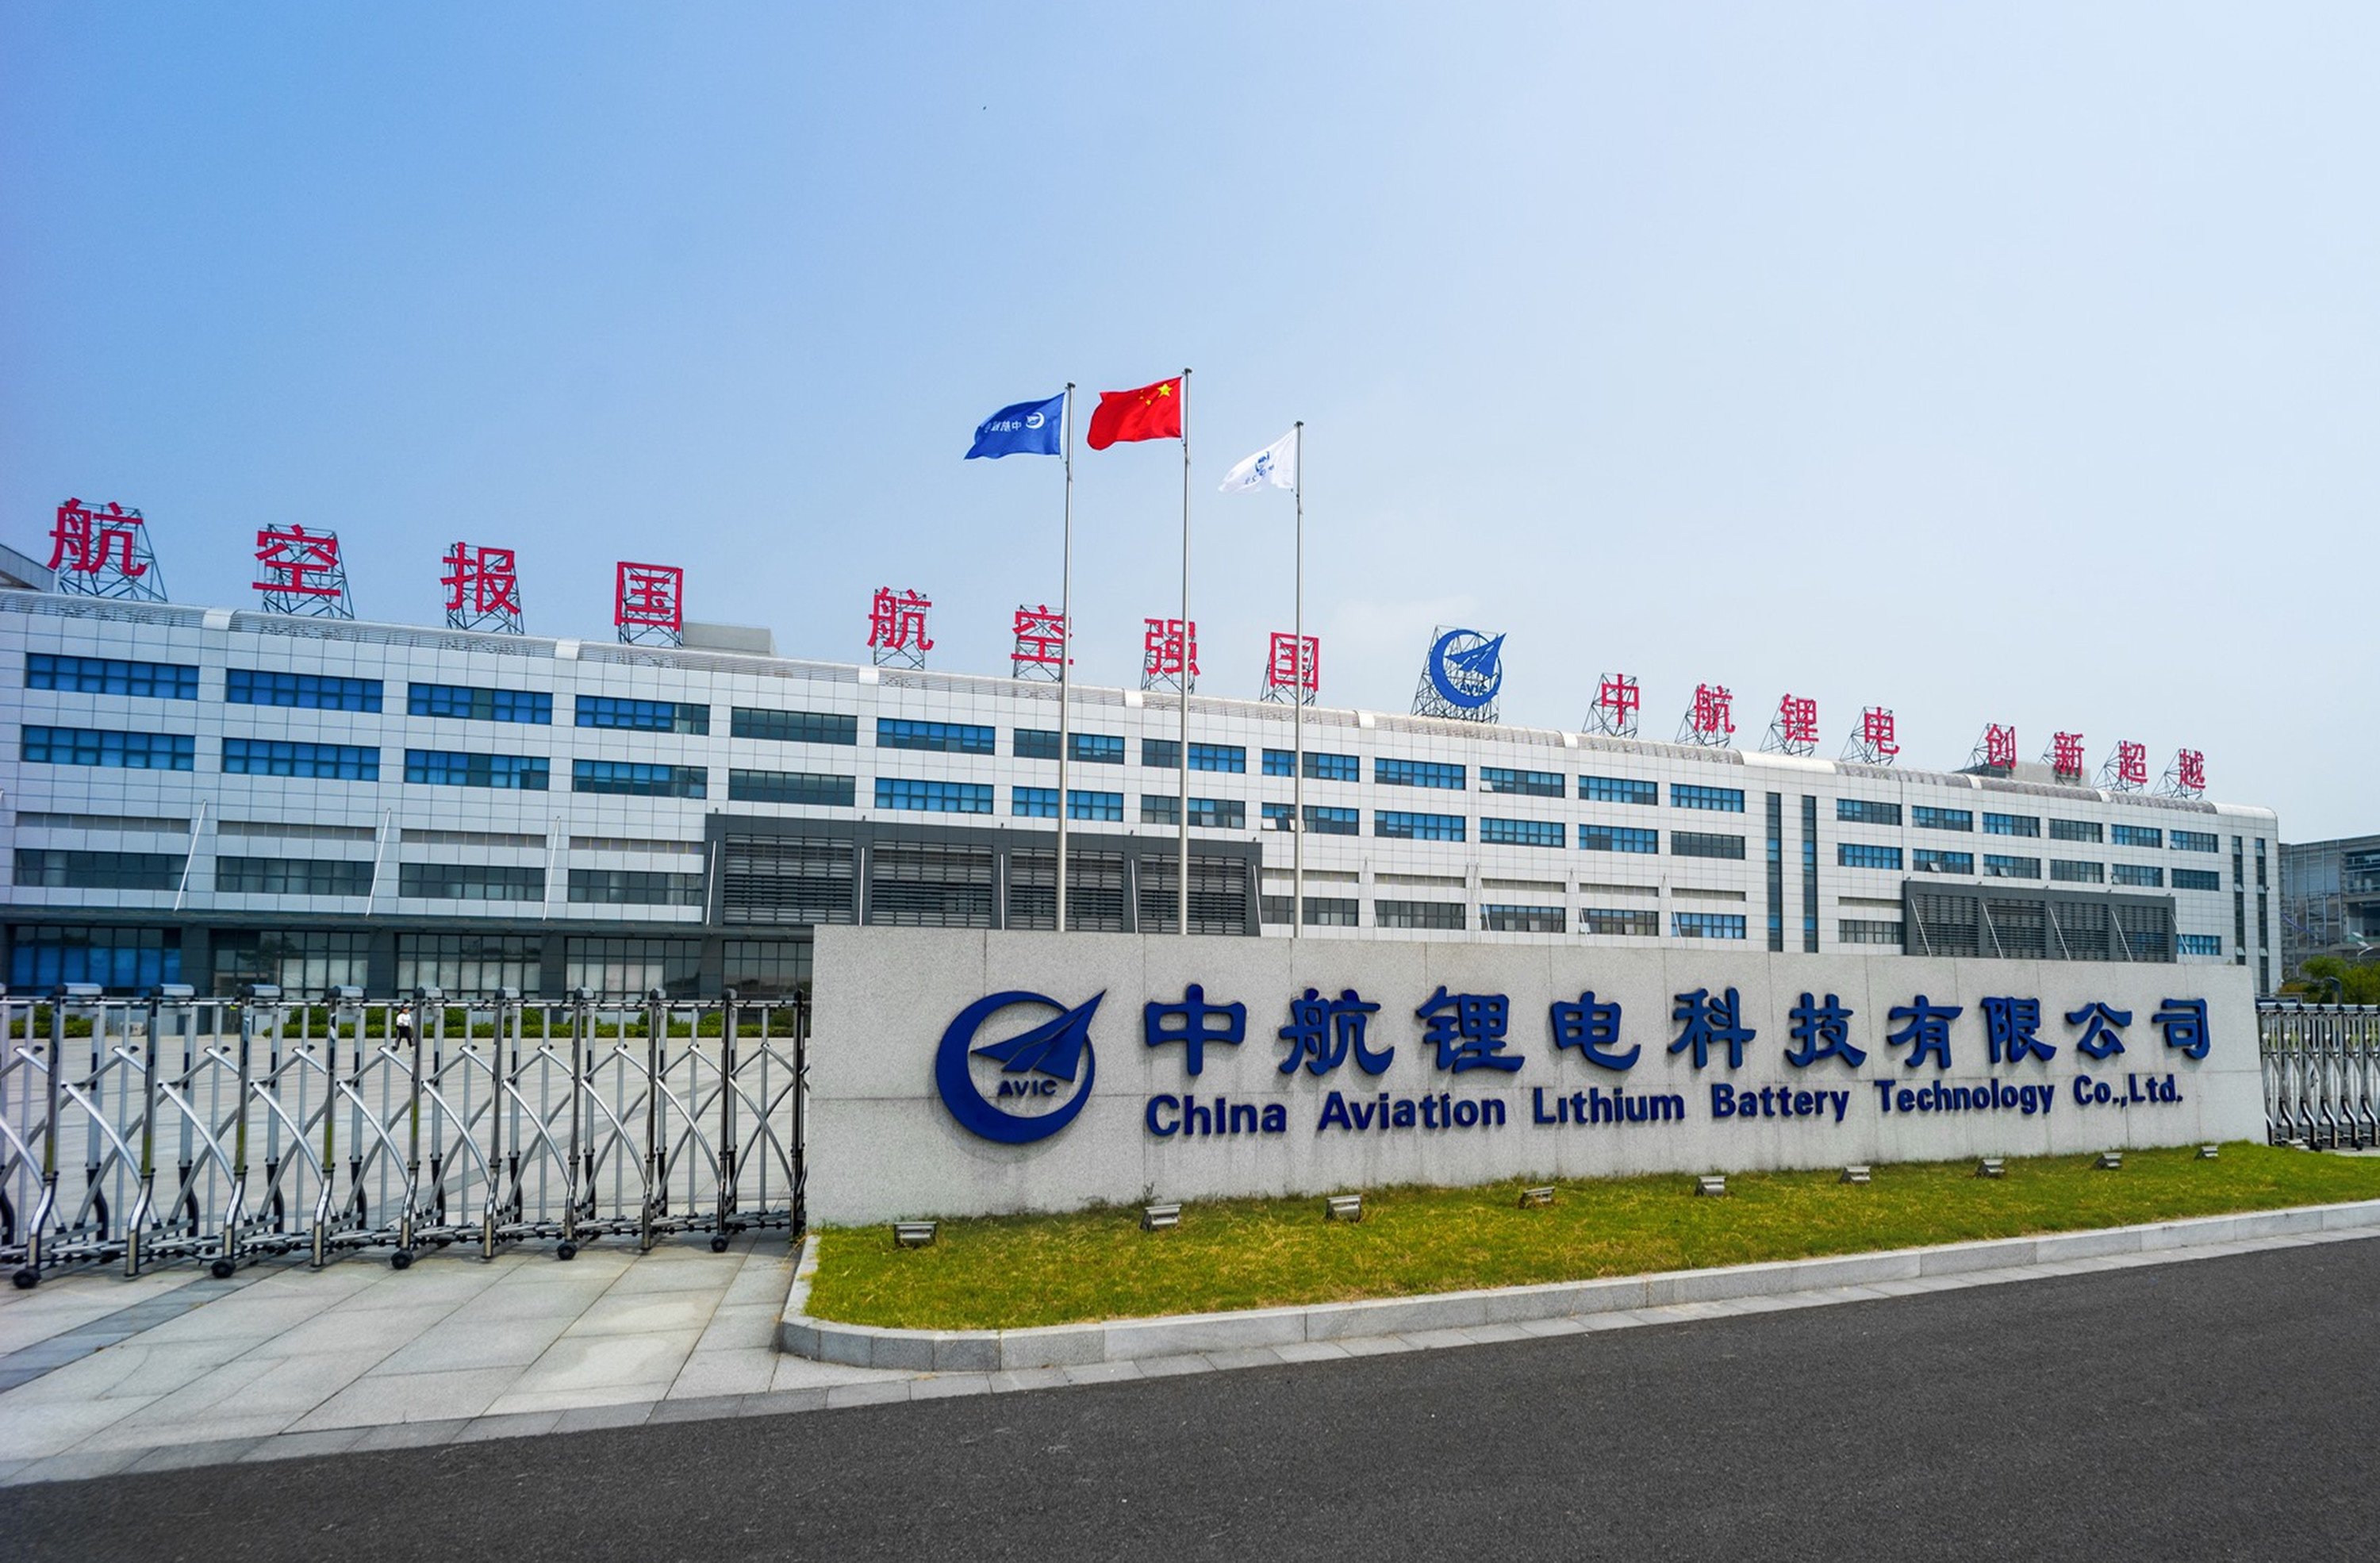 China Aviation Lithium Battery (CALB), the country’s third-largest maker of electric-vehicle batteries won approval for a share sale from the Hong Kong stock exchange’s listing committee on Thursday. Photo: Facebook